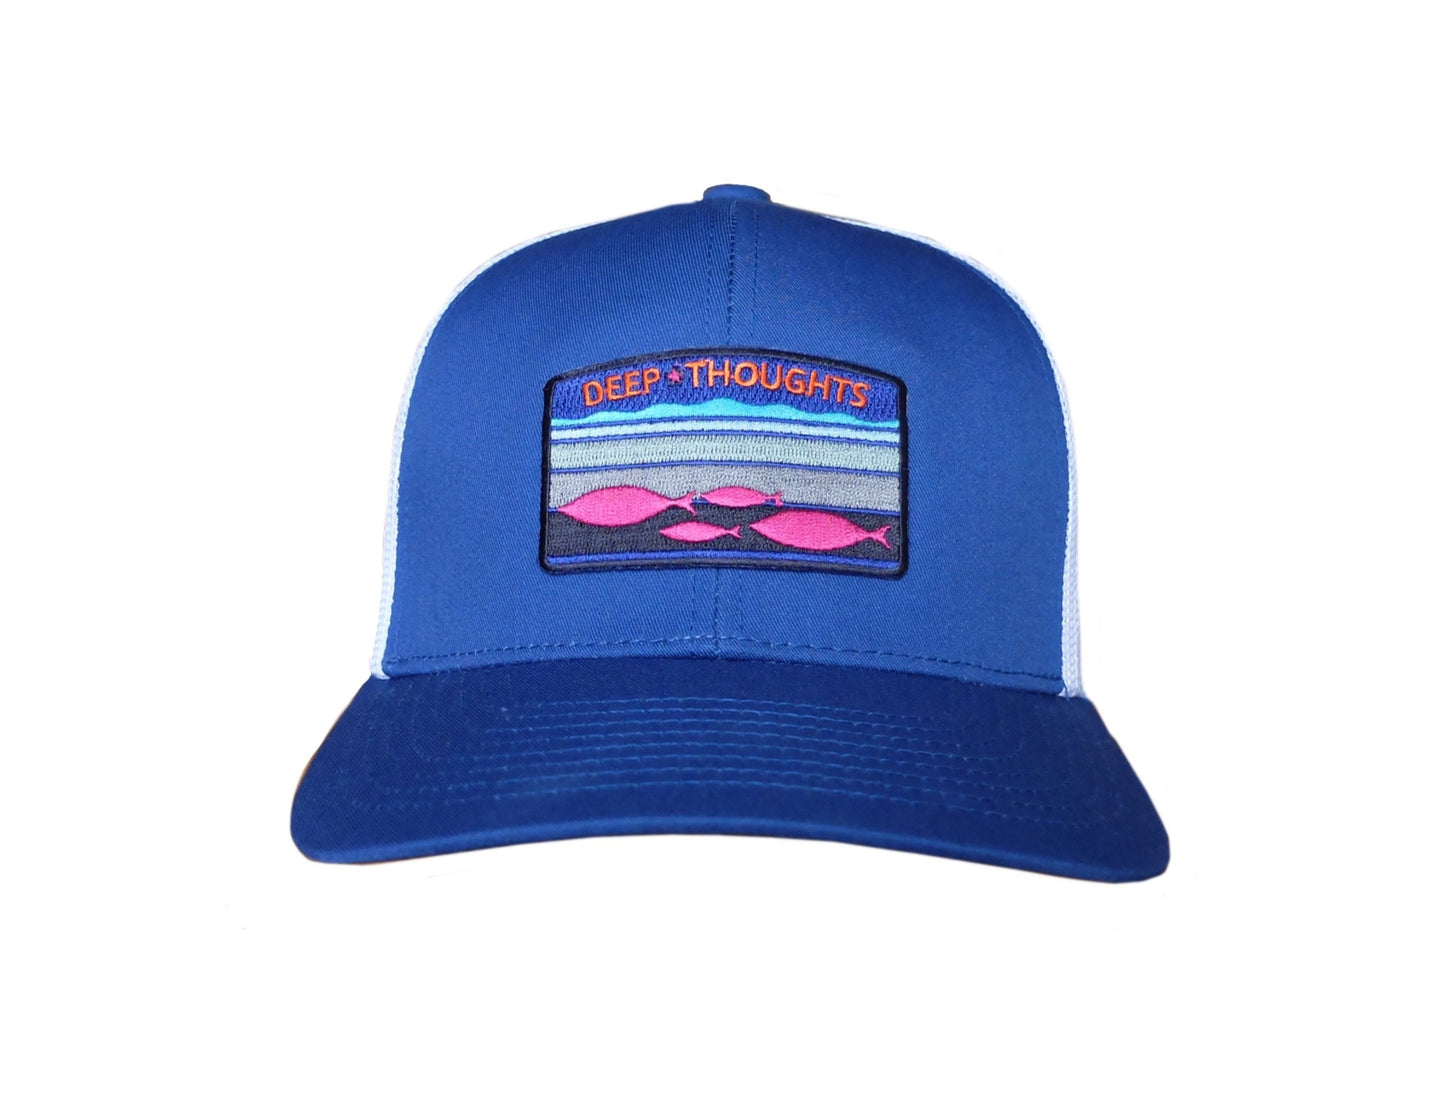 front view of royal blue and white trucker cap with embroidered patch showing fish swimming in ocean currents and 'Deep Thoughts' text